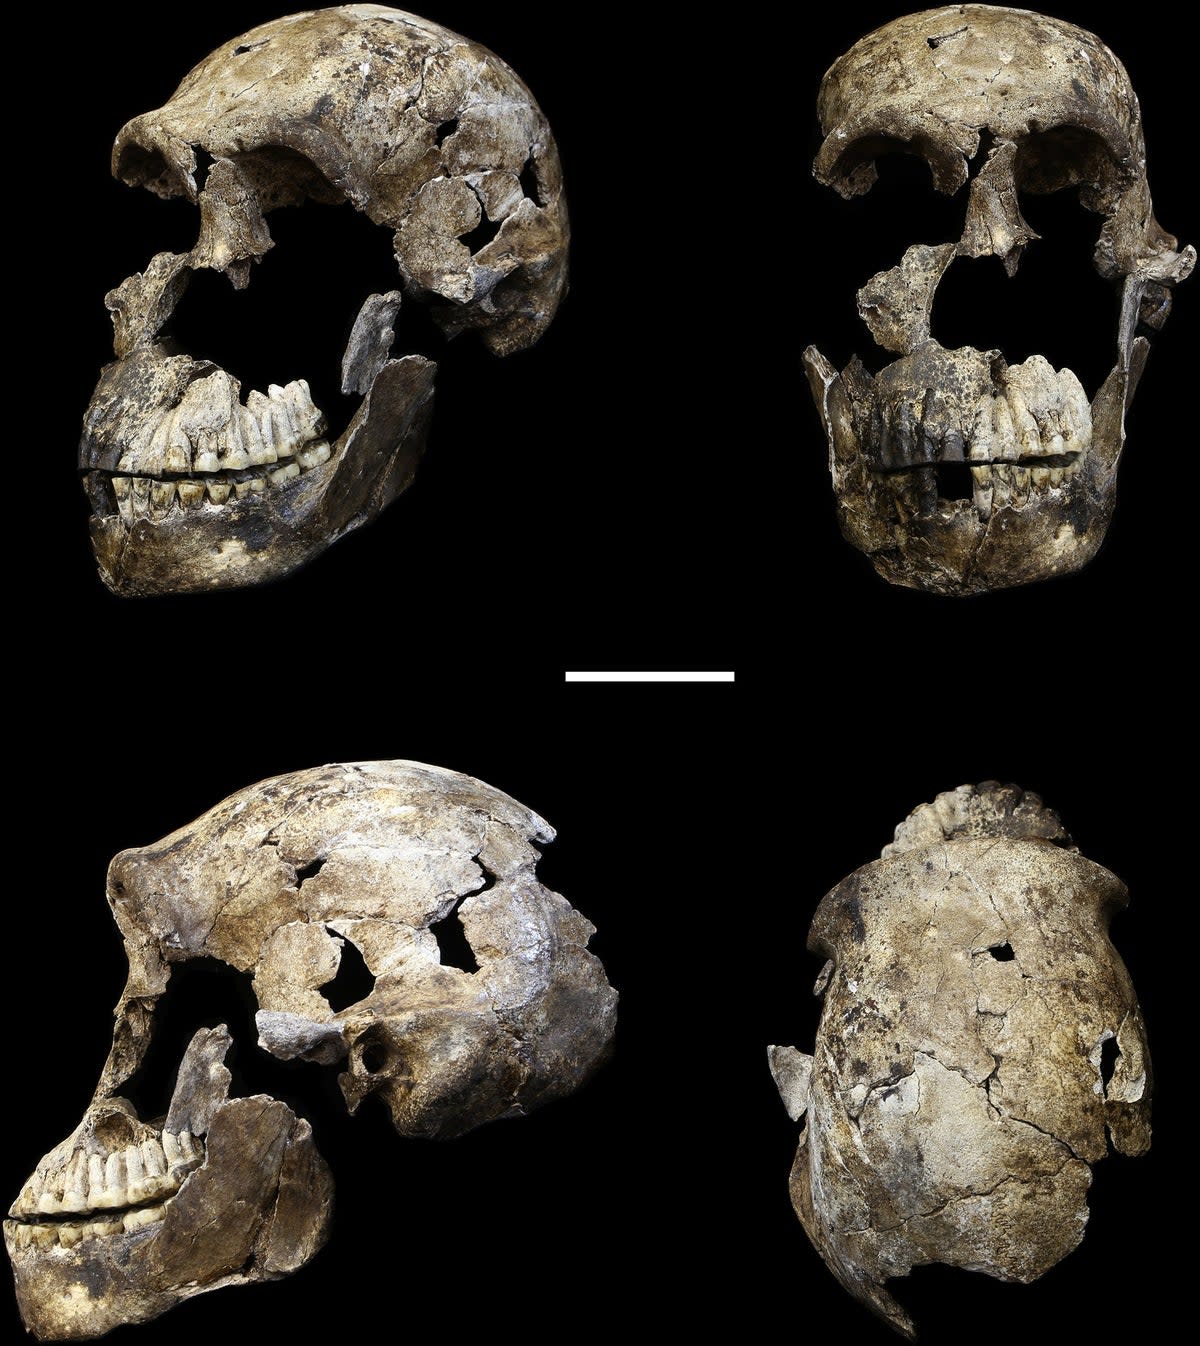 The species has been named Homo naledi by the scientists (Wikimedia Commons/CC BY 4.0)